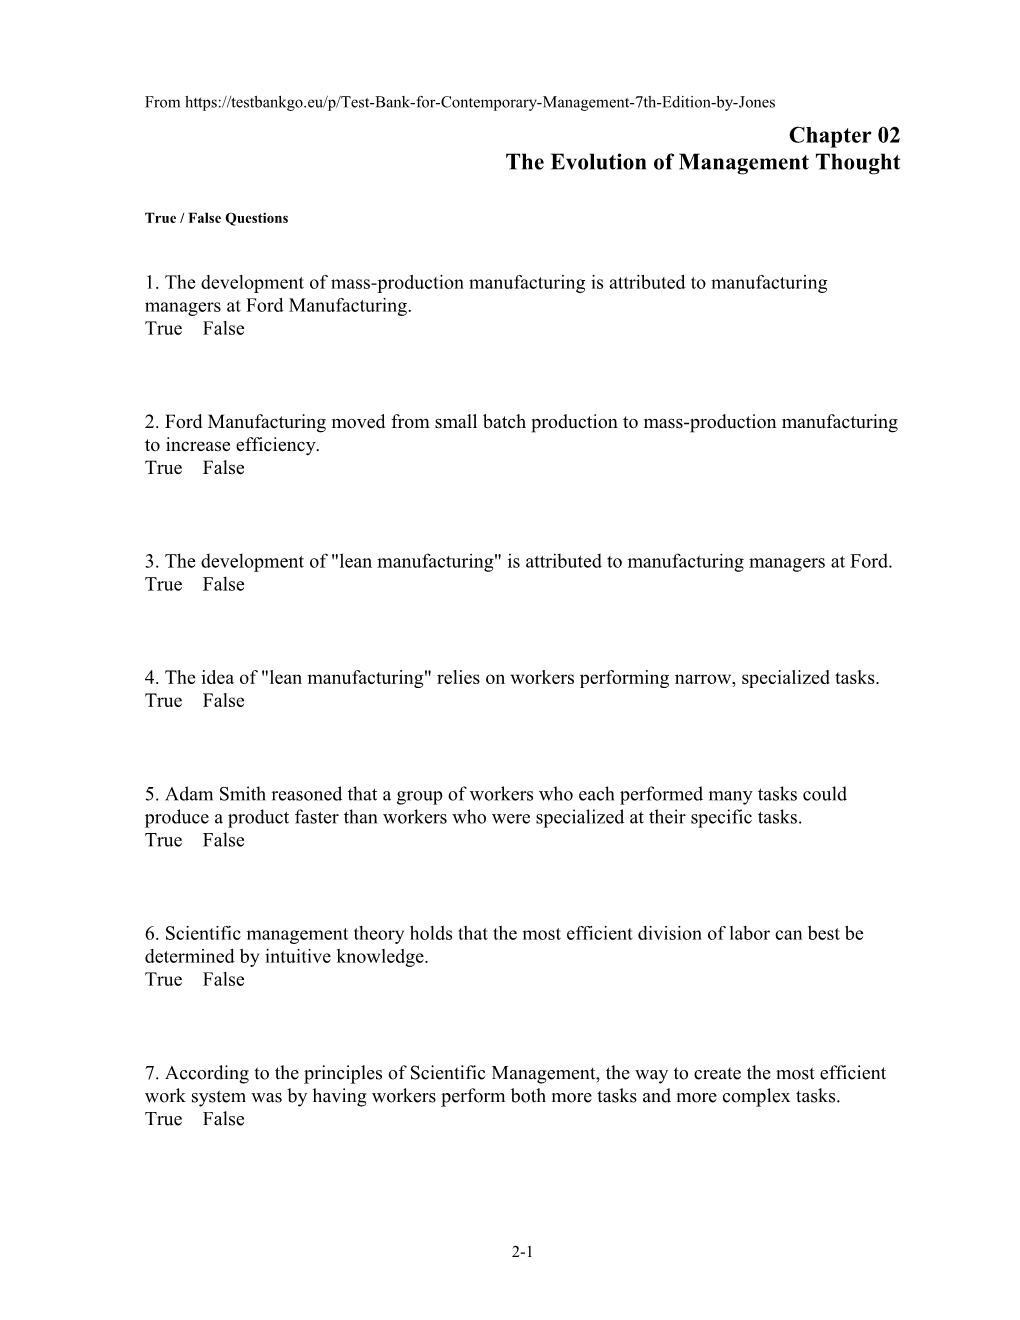 Chapter 02 the Evolution of Management Thought